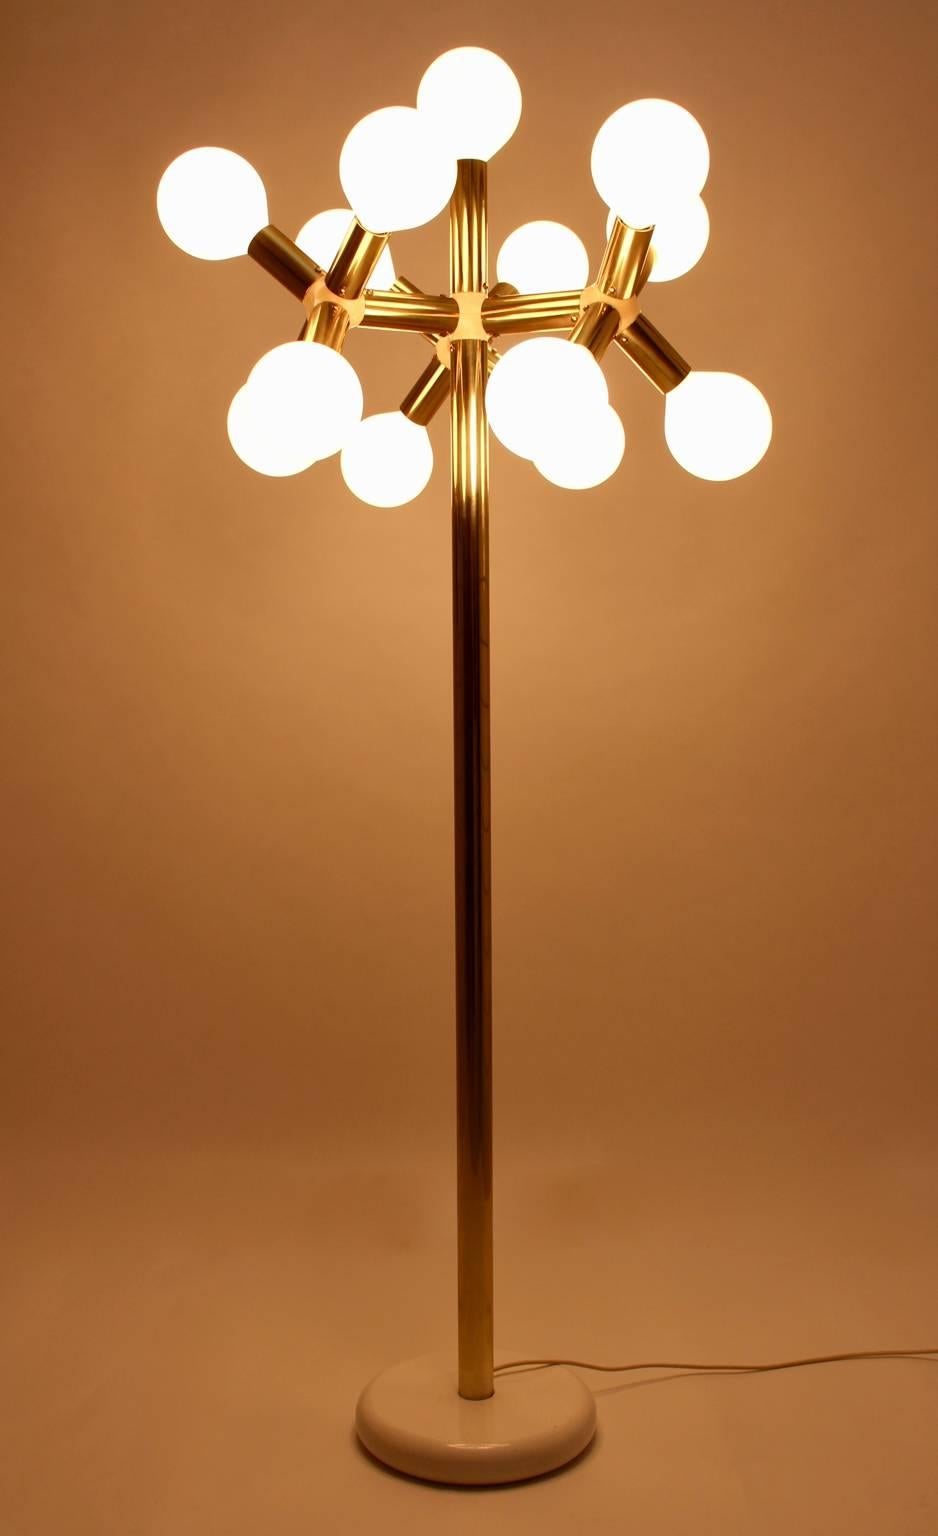 Brassed metal atomic floor Lamp designed by the Swiss Designer Duo Trix & Robert Haussmann, 1960s executed by Swisslamp International.
The base was made of metal white enameled furthermore the tube stand was made of brass.
The brass arms and 13 opal